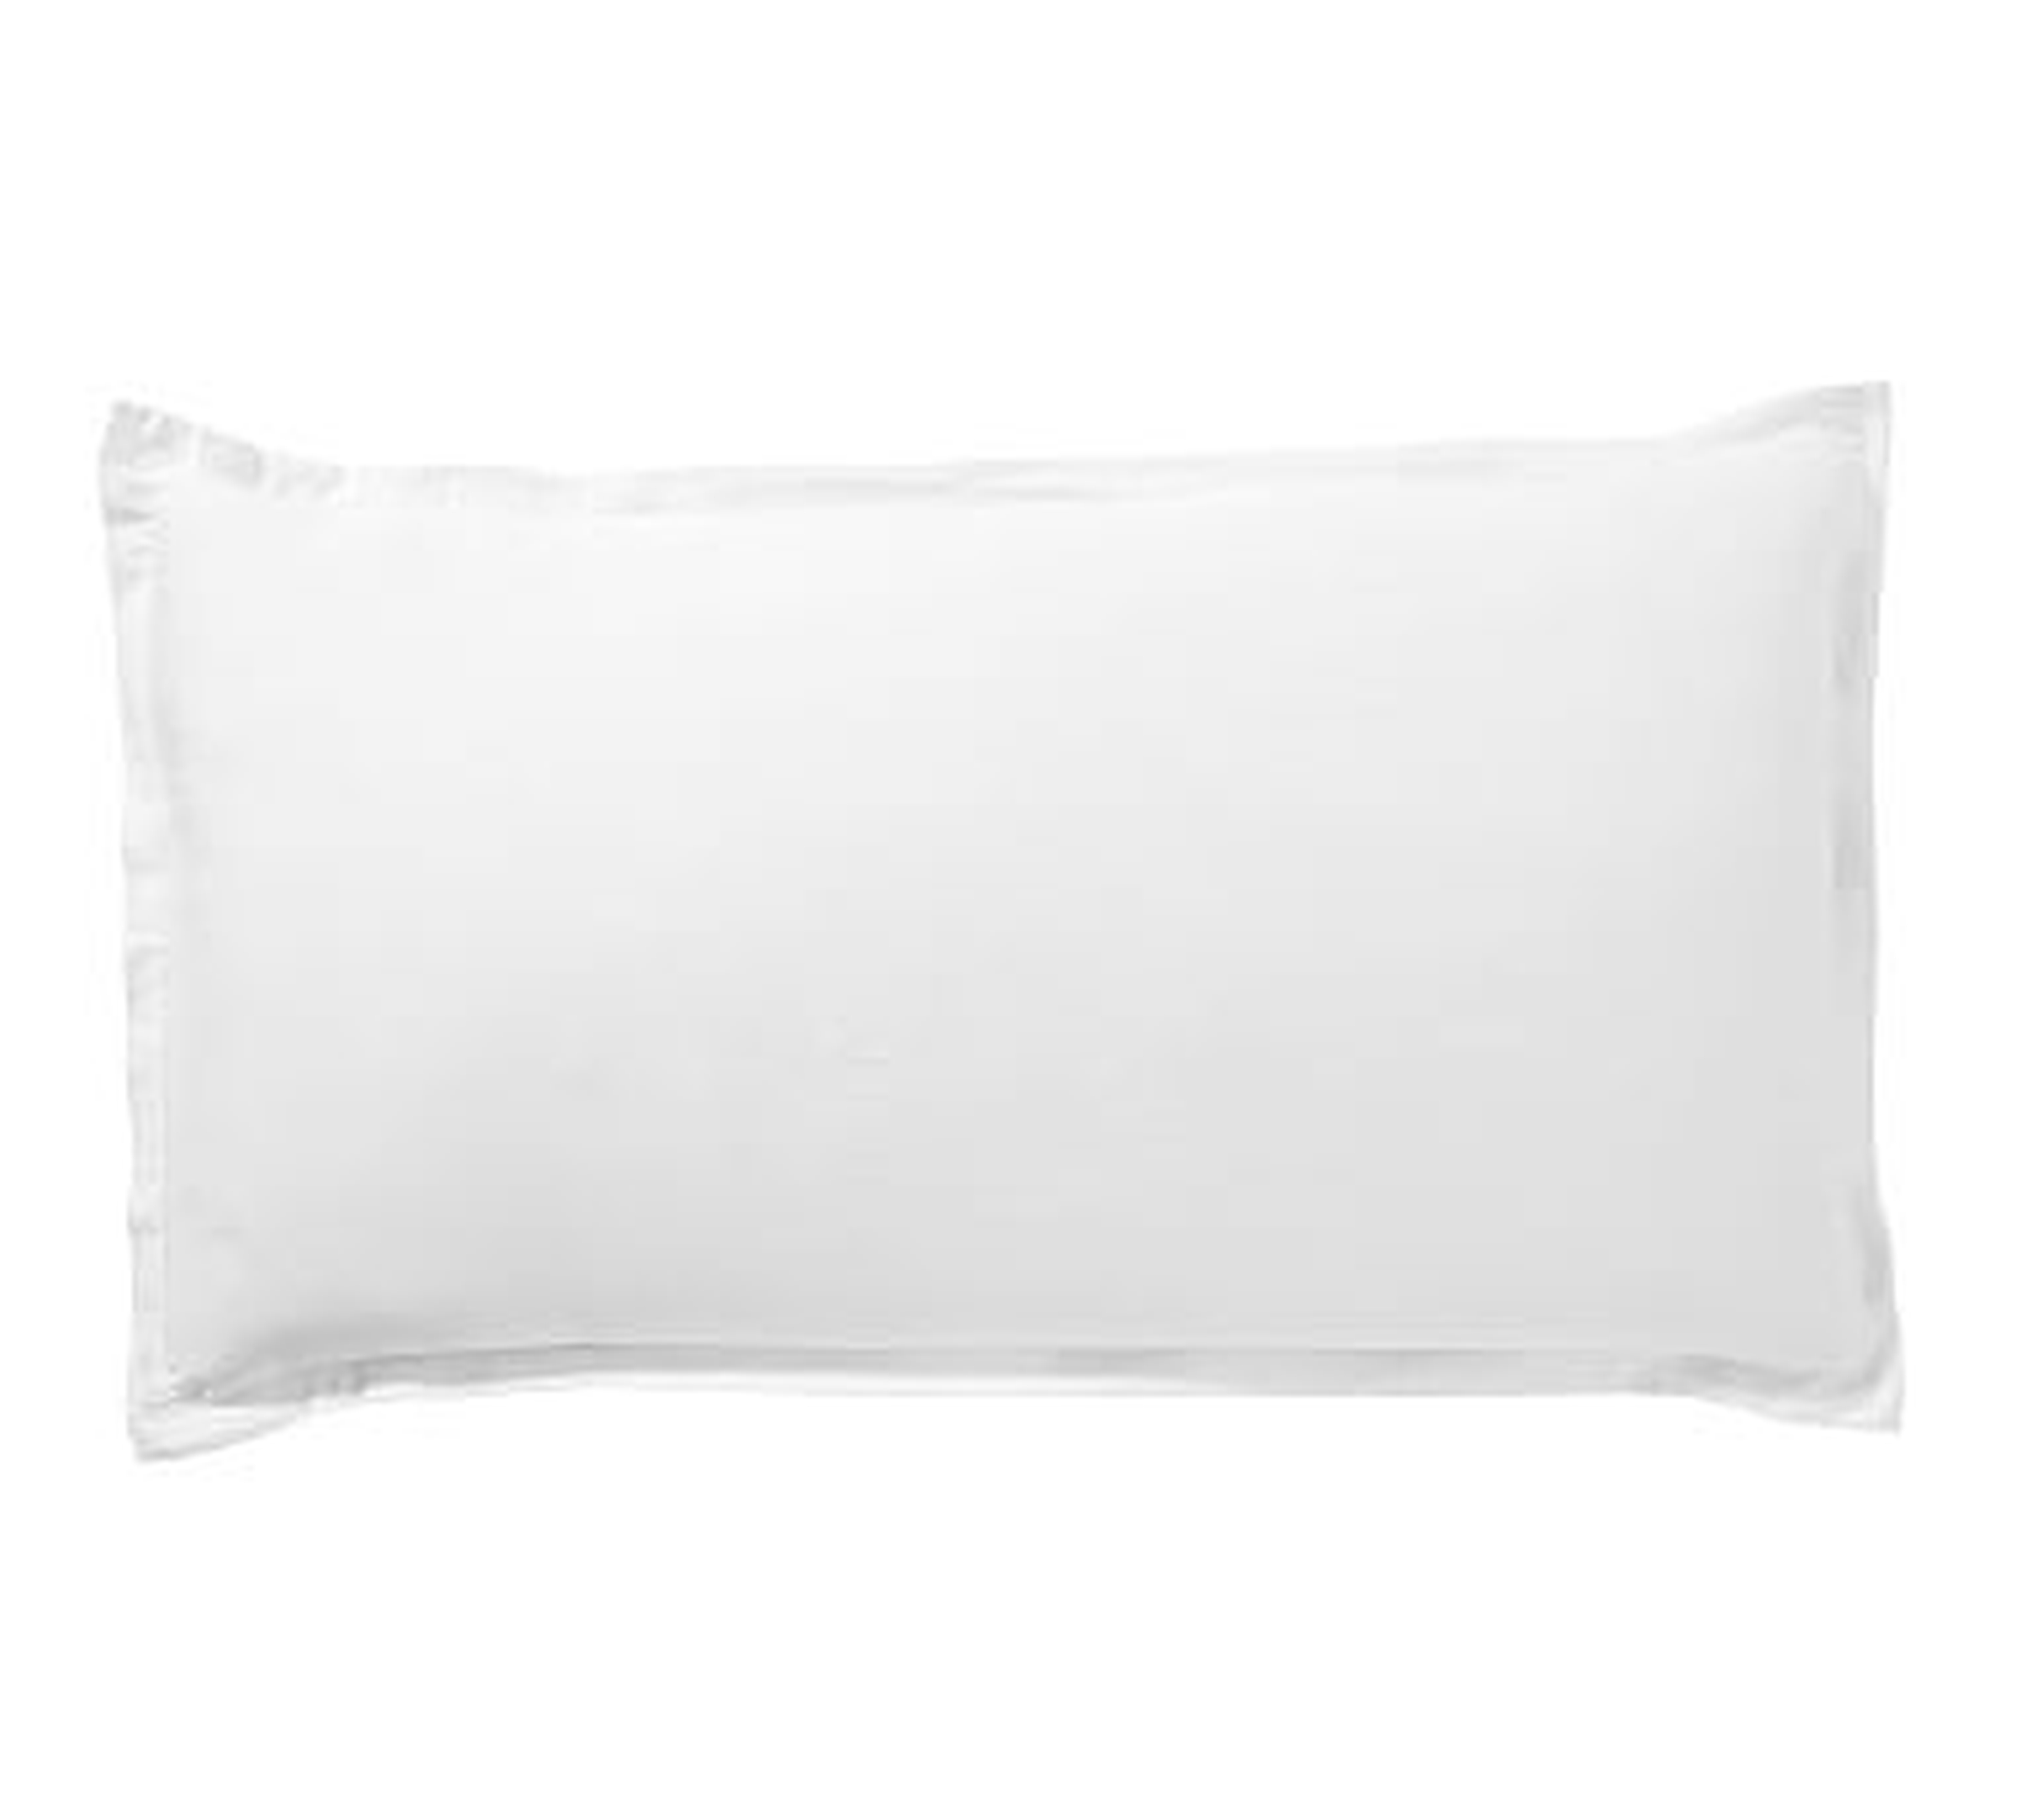 Washed Cotton Sateen Sham, King, White - Pottery Barn